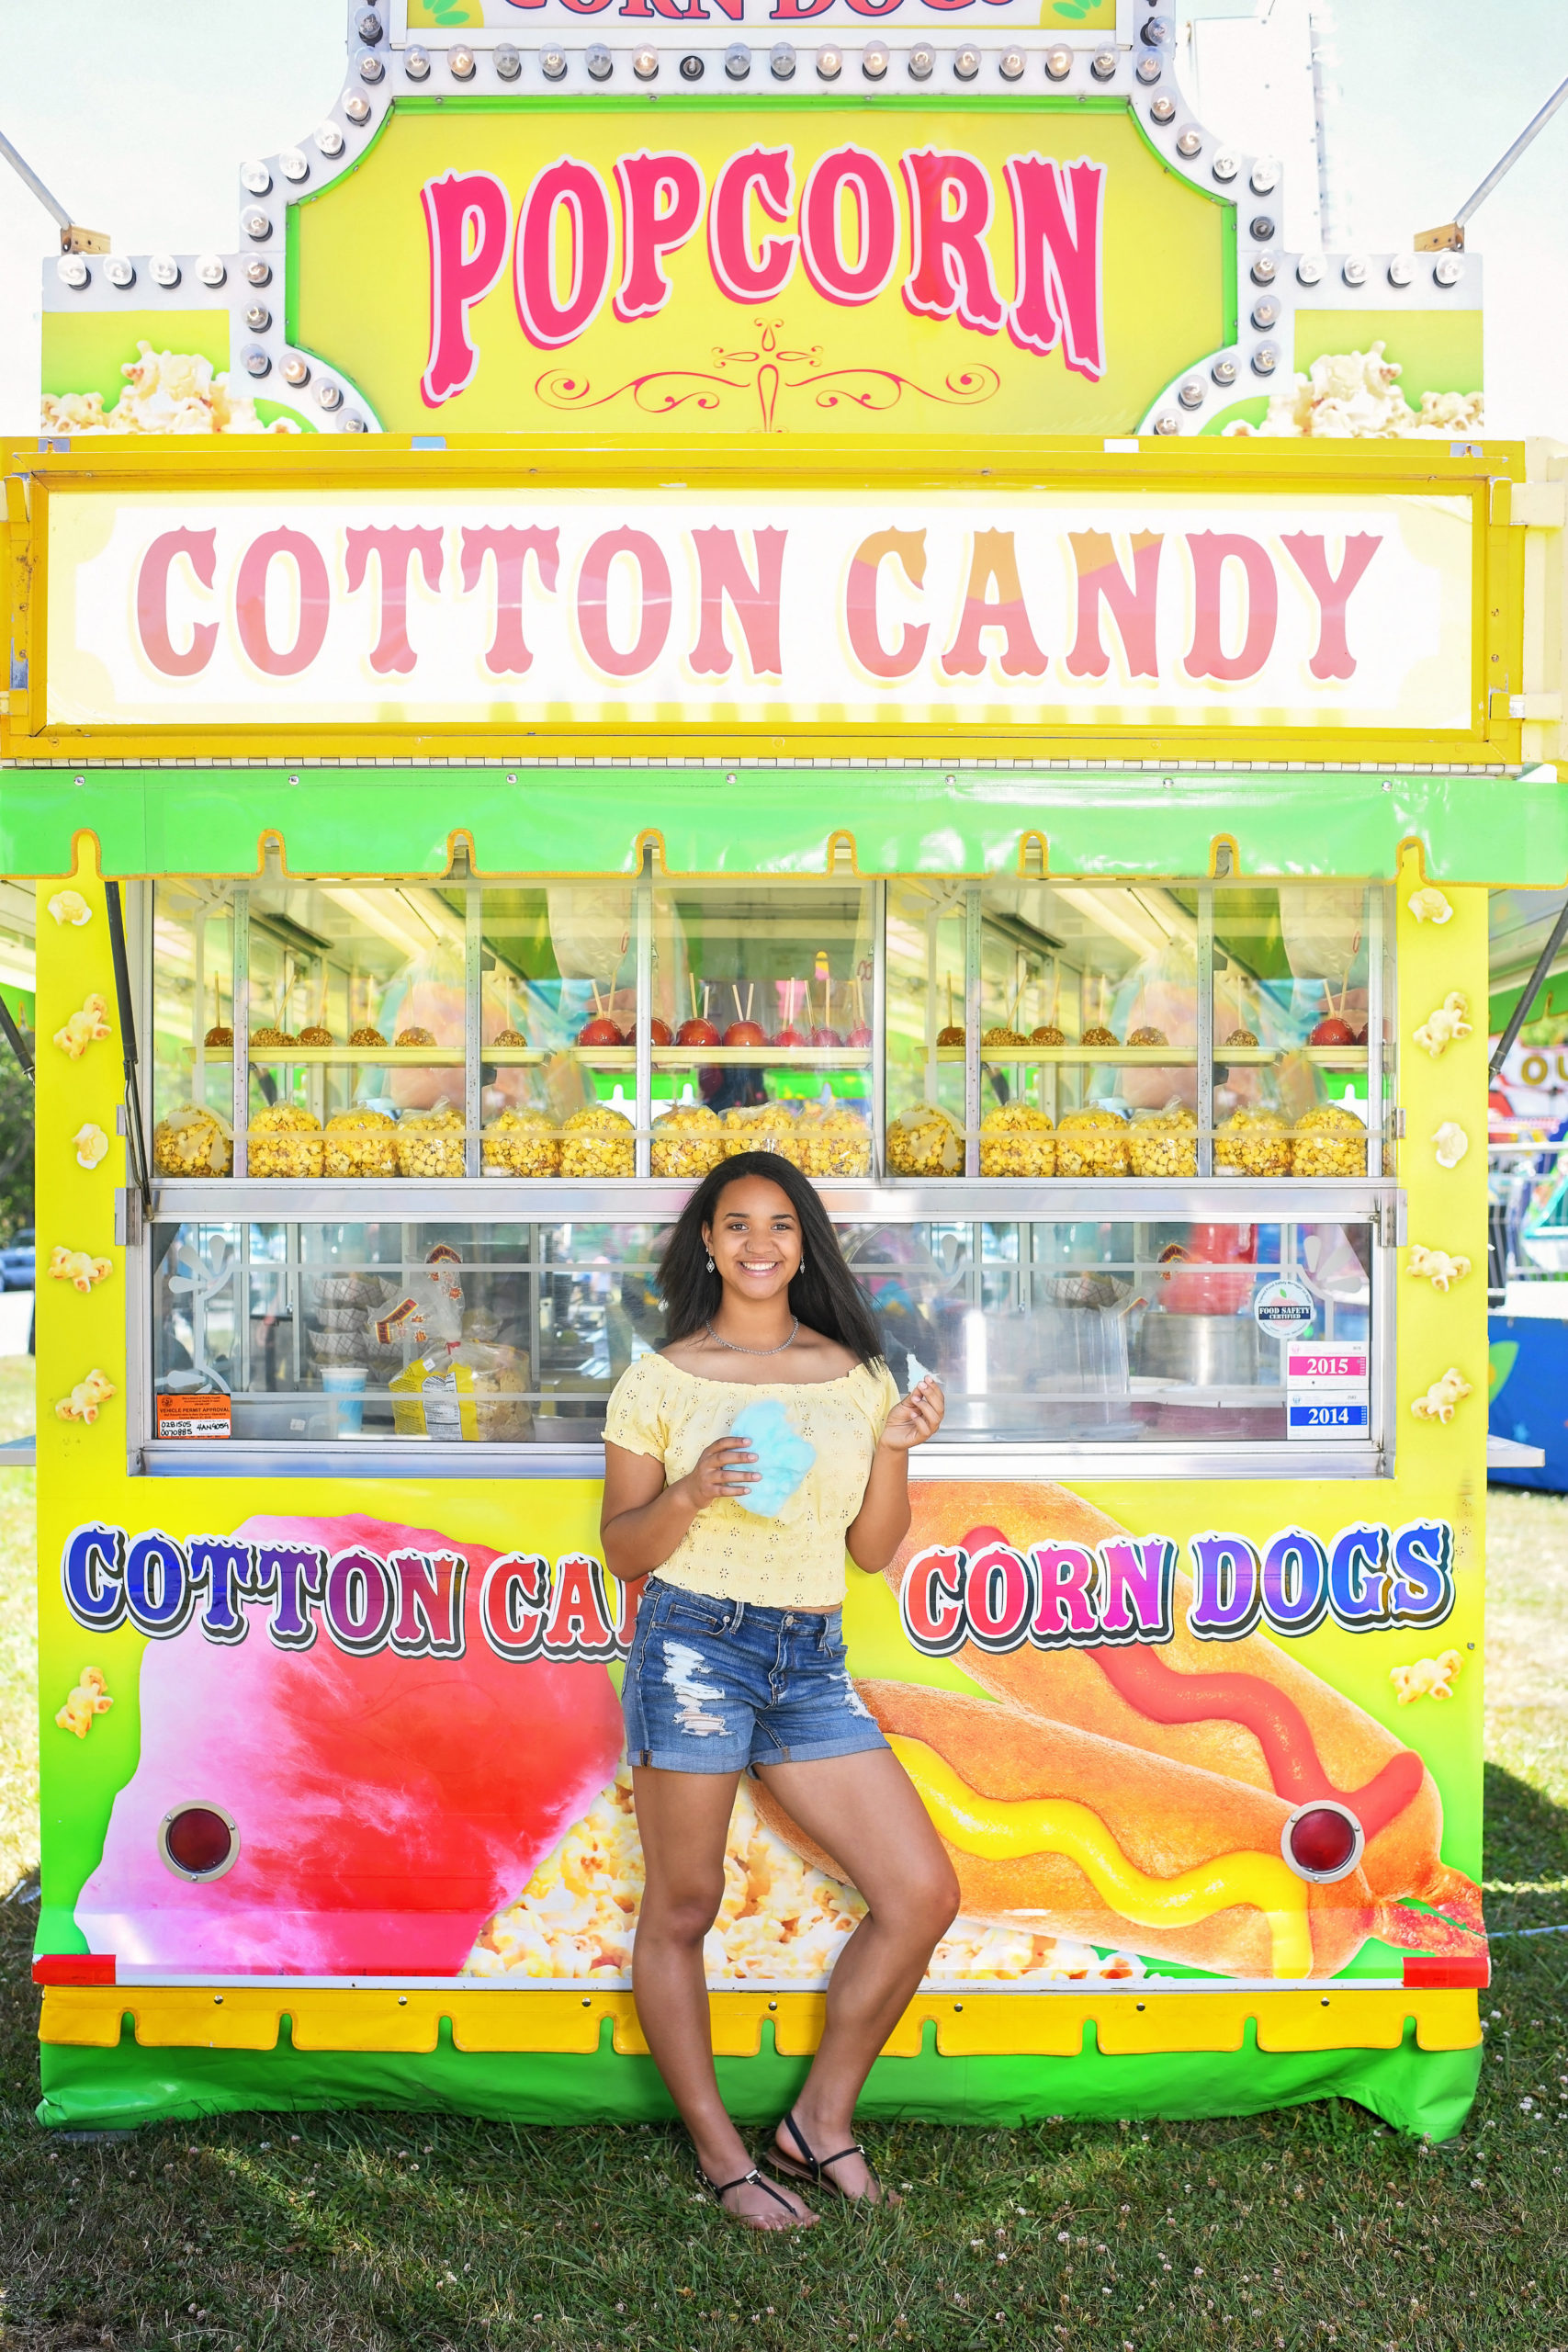 A senior carnival shoot at the Fortuna Rodeo